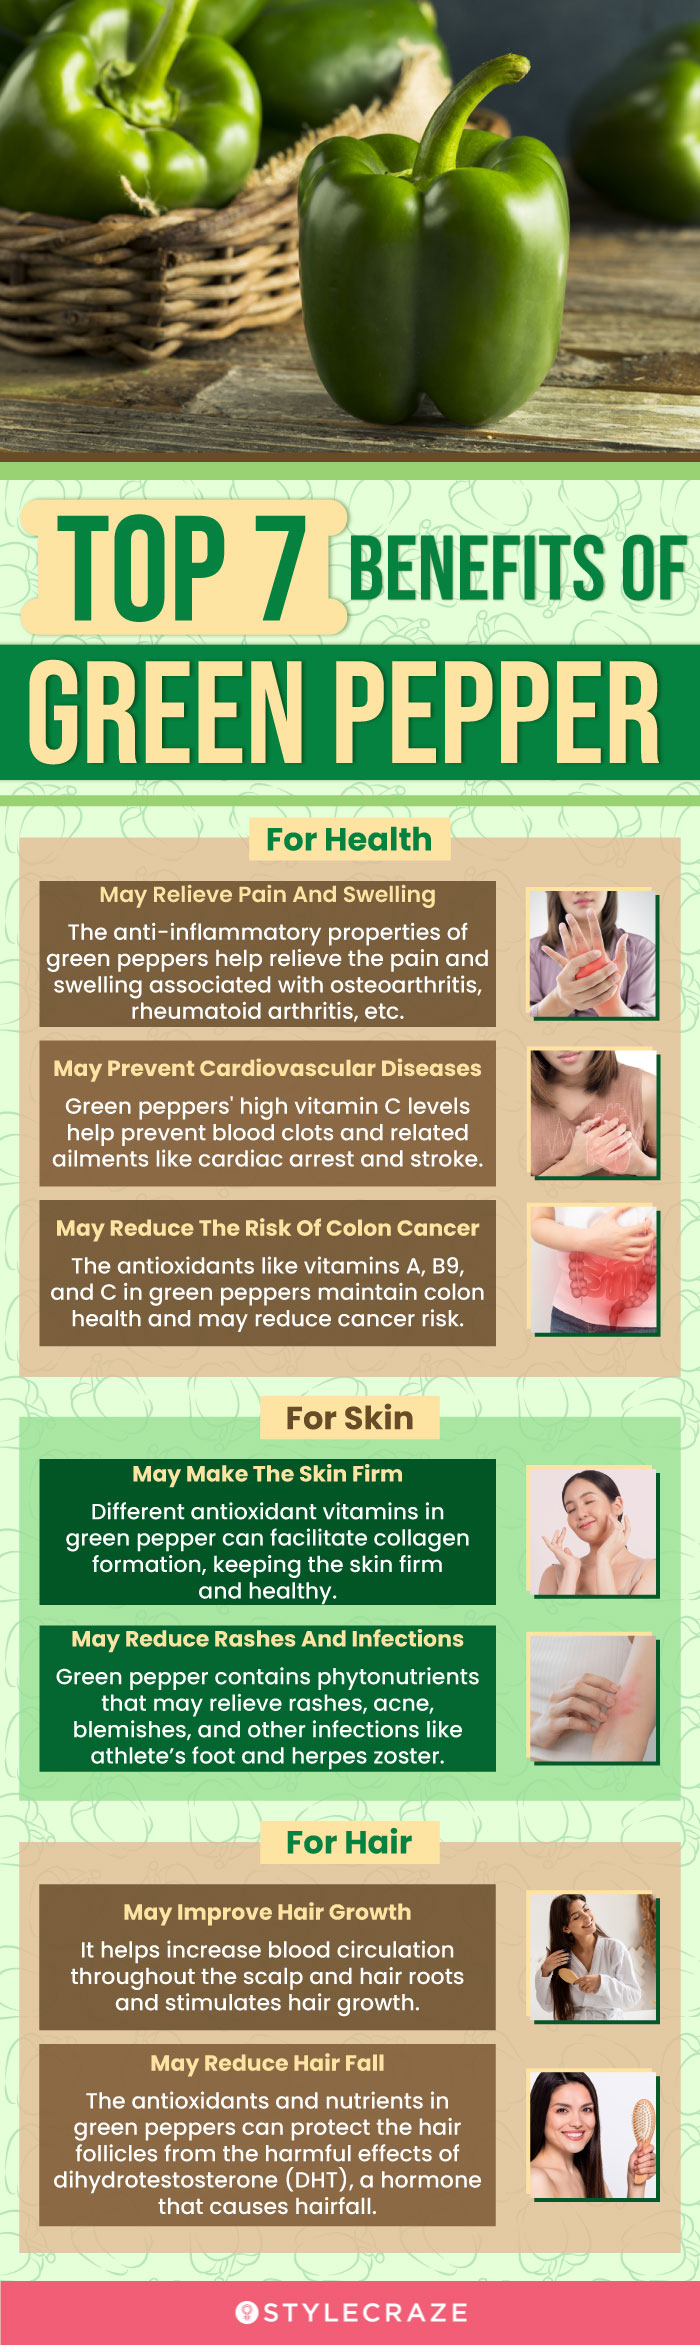 top 7 benefits of green pepper (infographic)